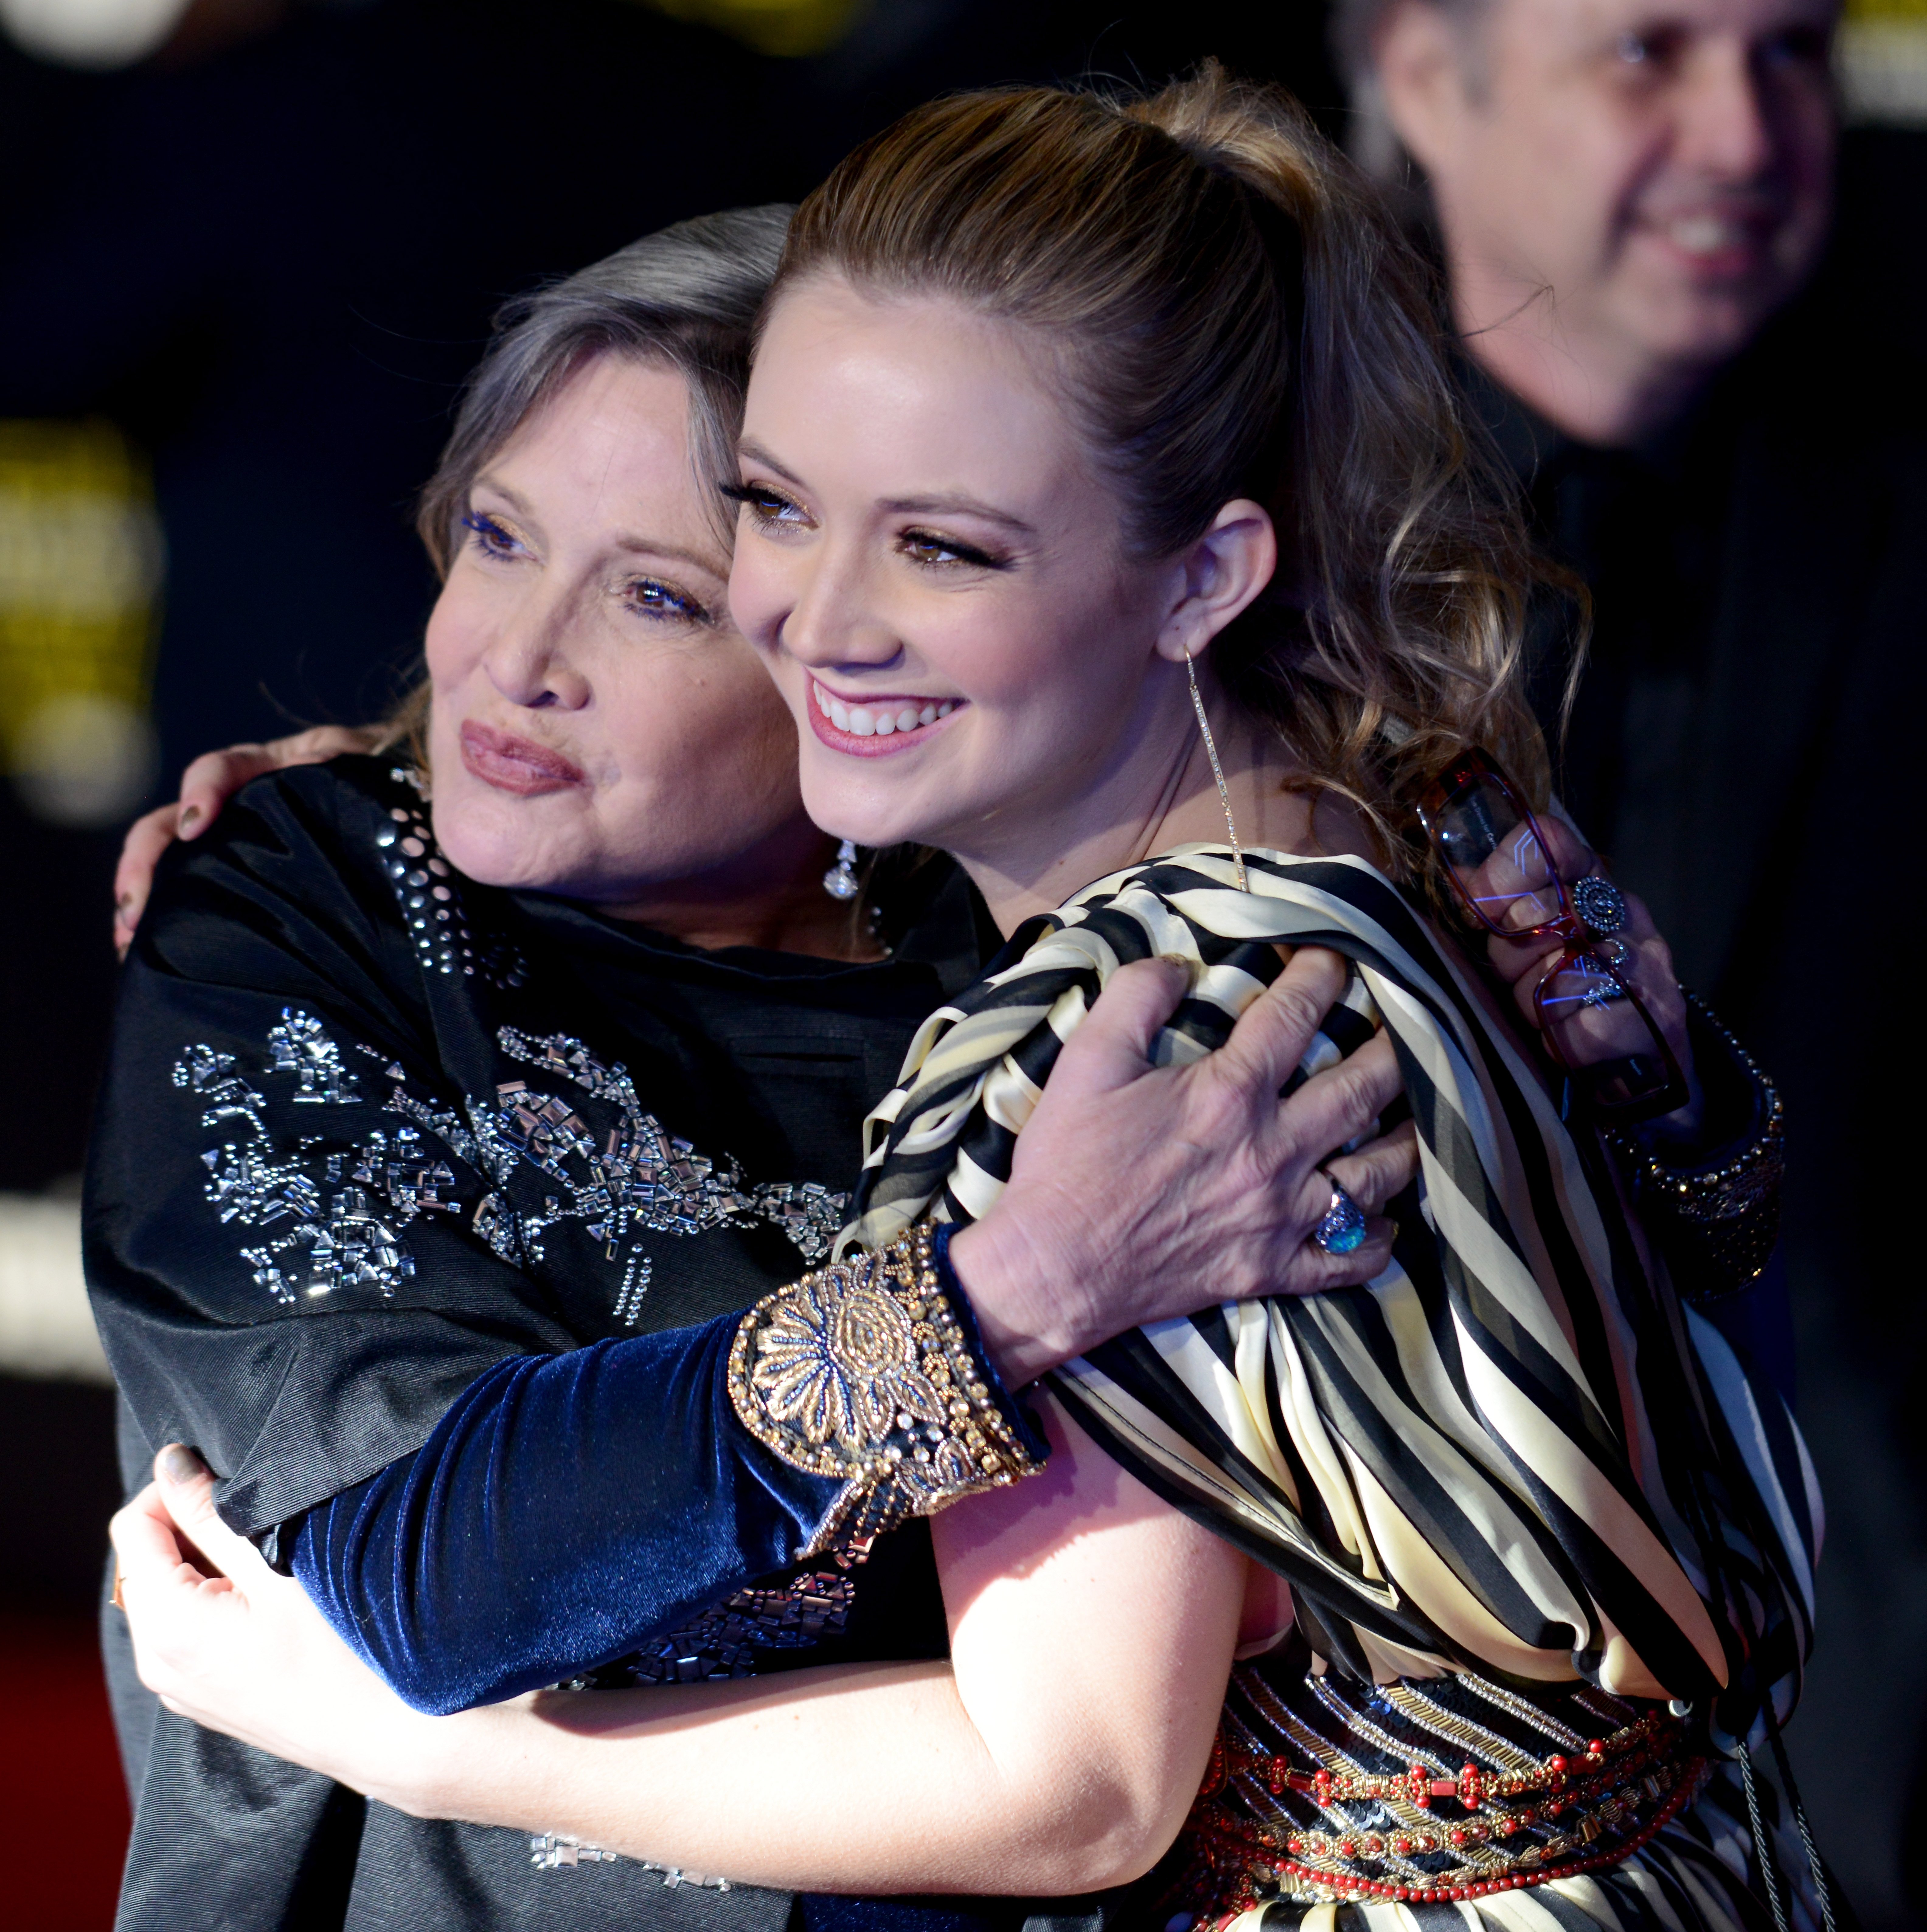 Carrie Fisher and Billie Lourd attend the premiere of "Star Wars: The Force Awakens" in Hollywood on December 14, 2015 | Photo: Getty Images